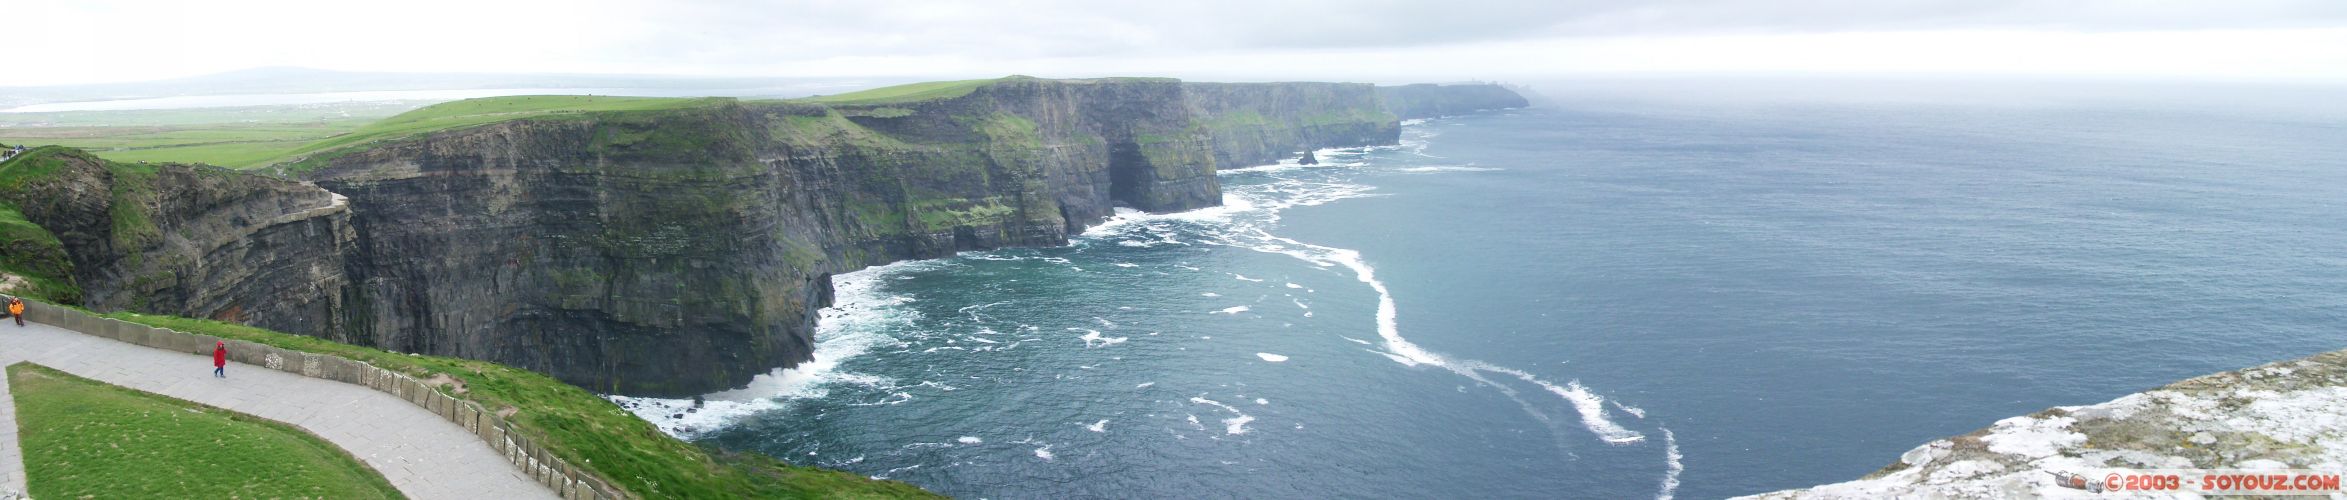 Cliffs of Moher - Panoramique
